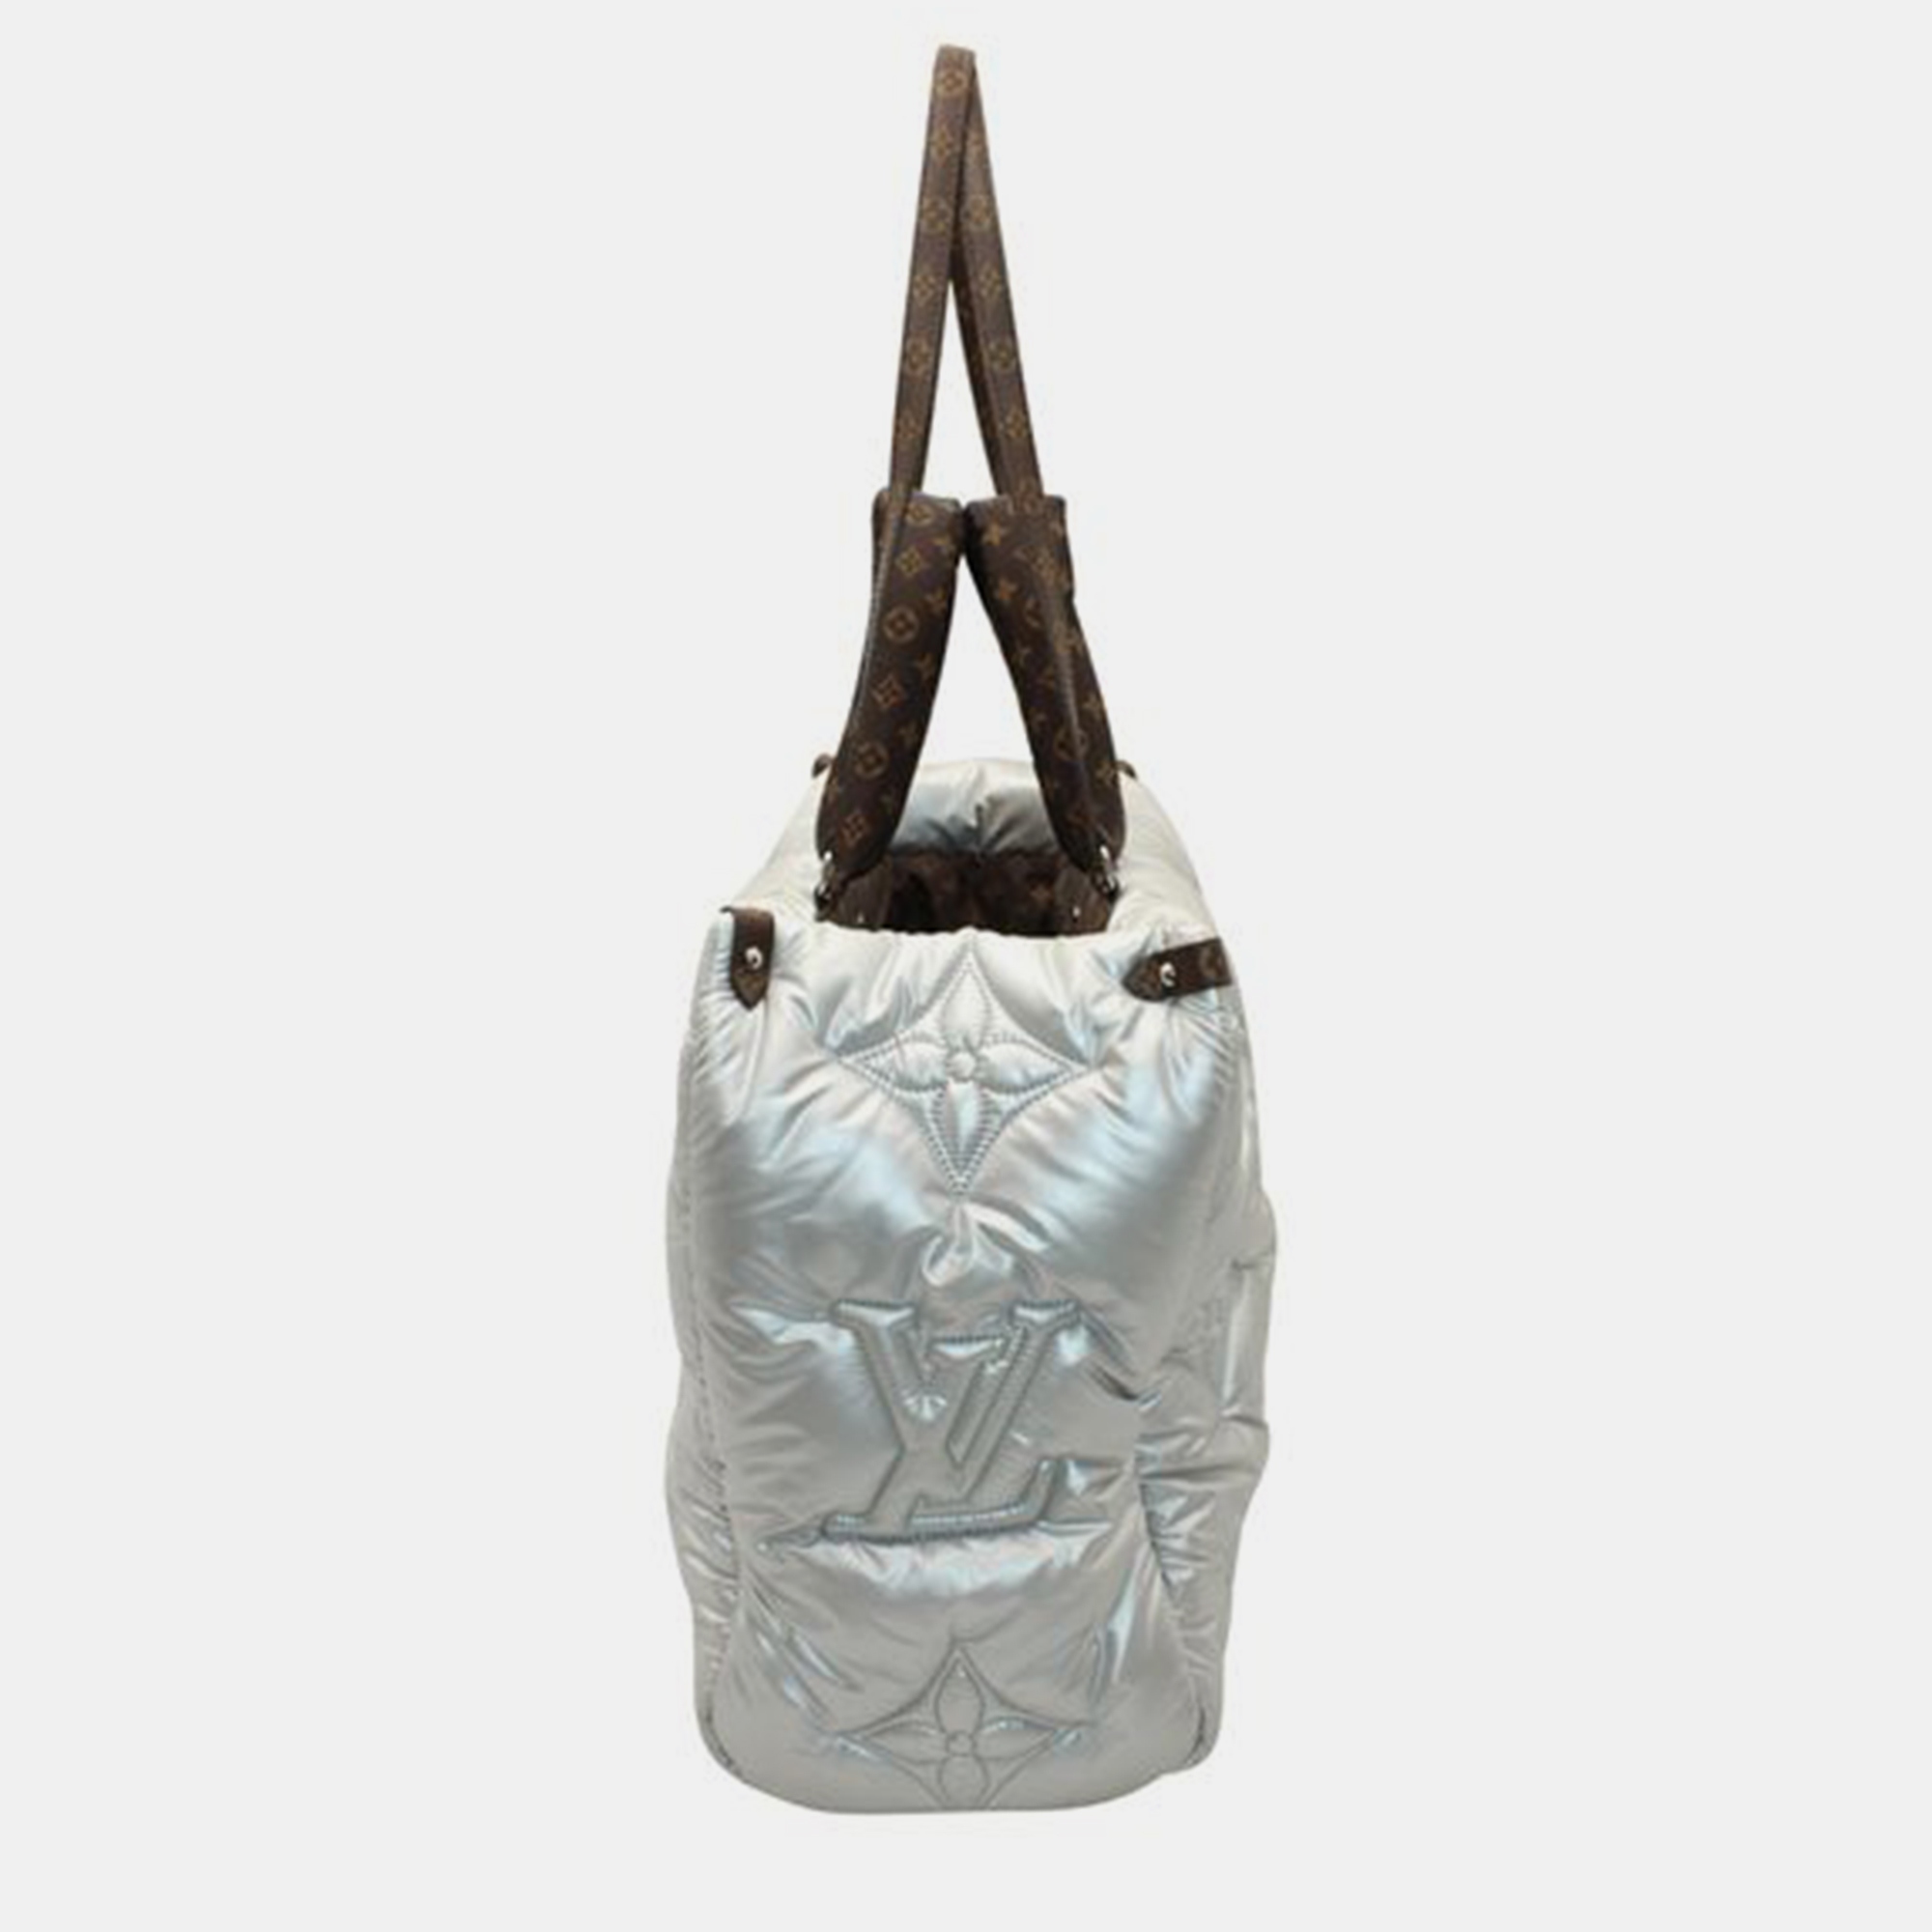 LOUIS VUITTON Silver Pillow OnTheGo GM Tote Bag SHOULDER BAGS